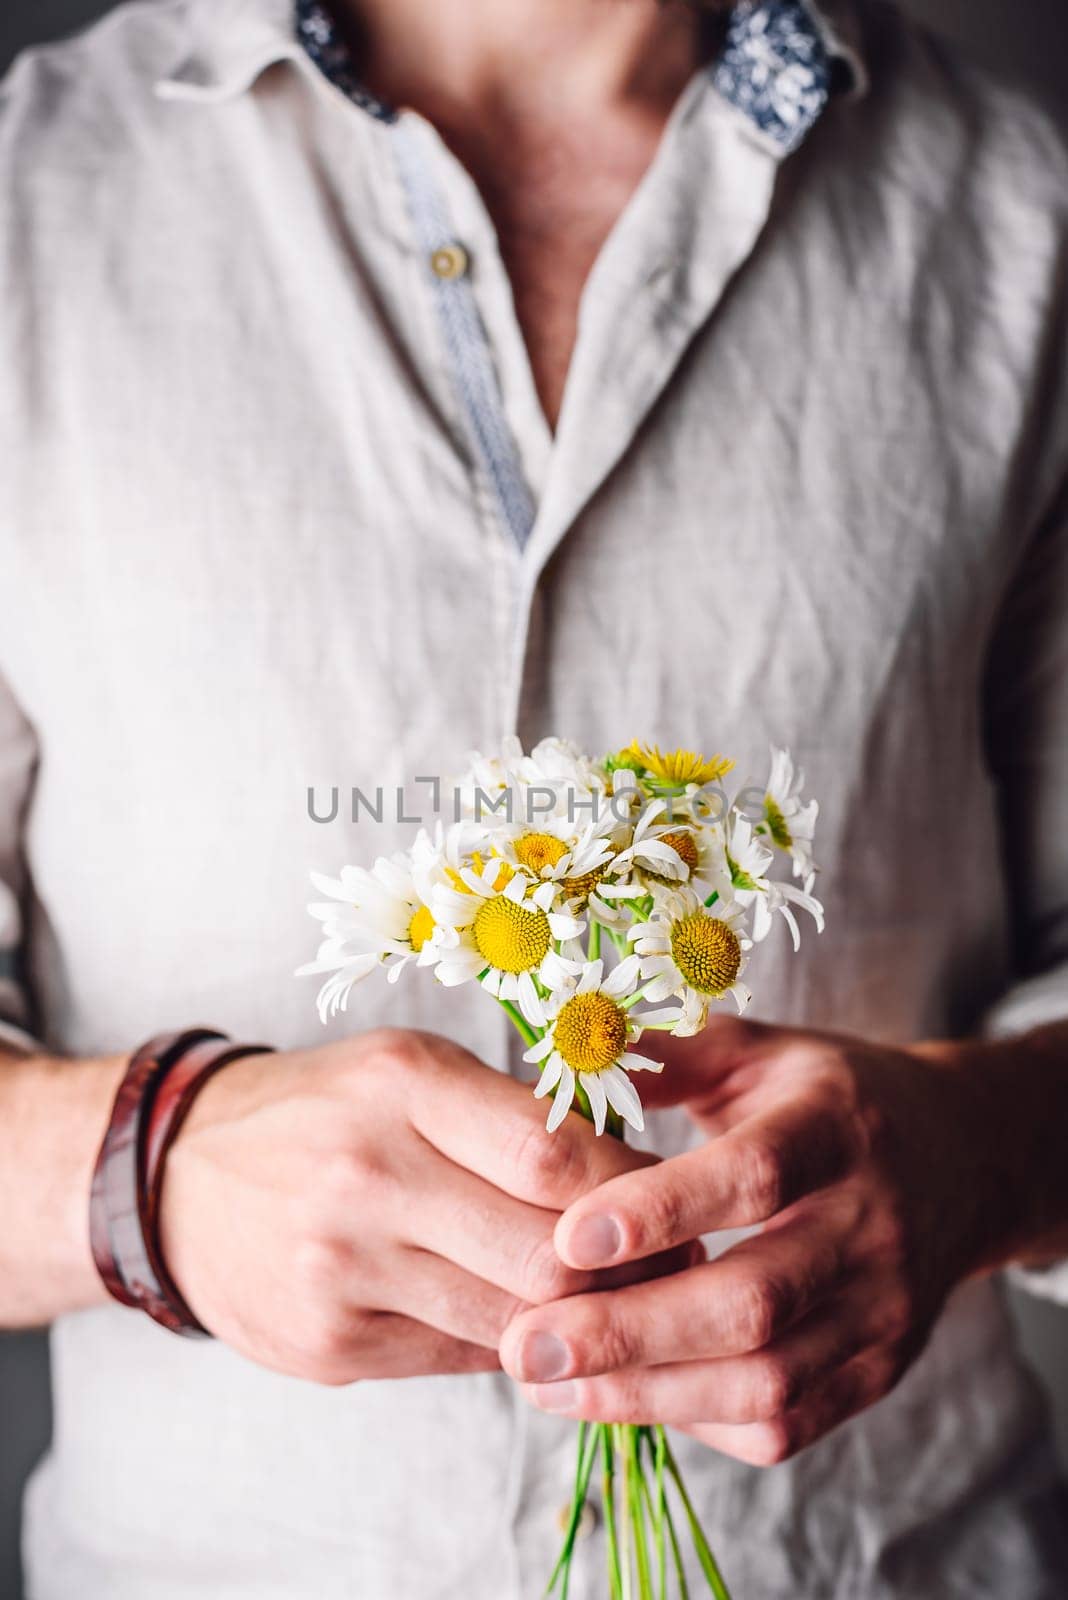 Man in Linen Shirt Holding Freshly Picked Chamomile Flowers in Hands